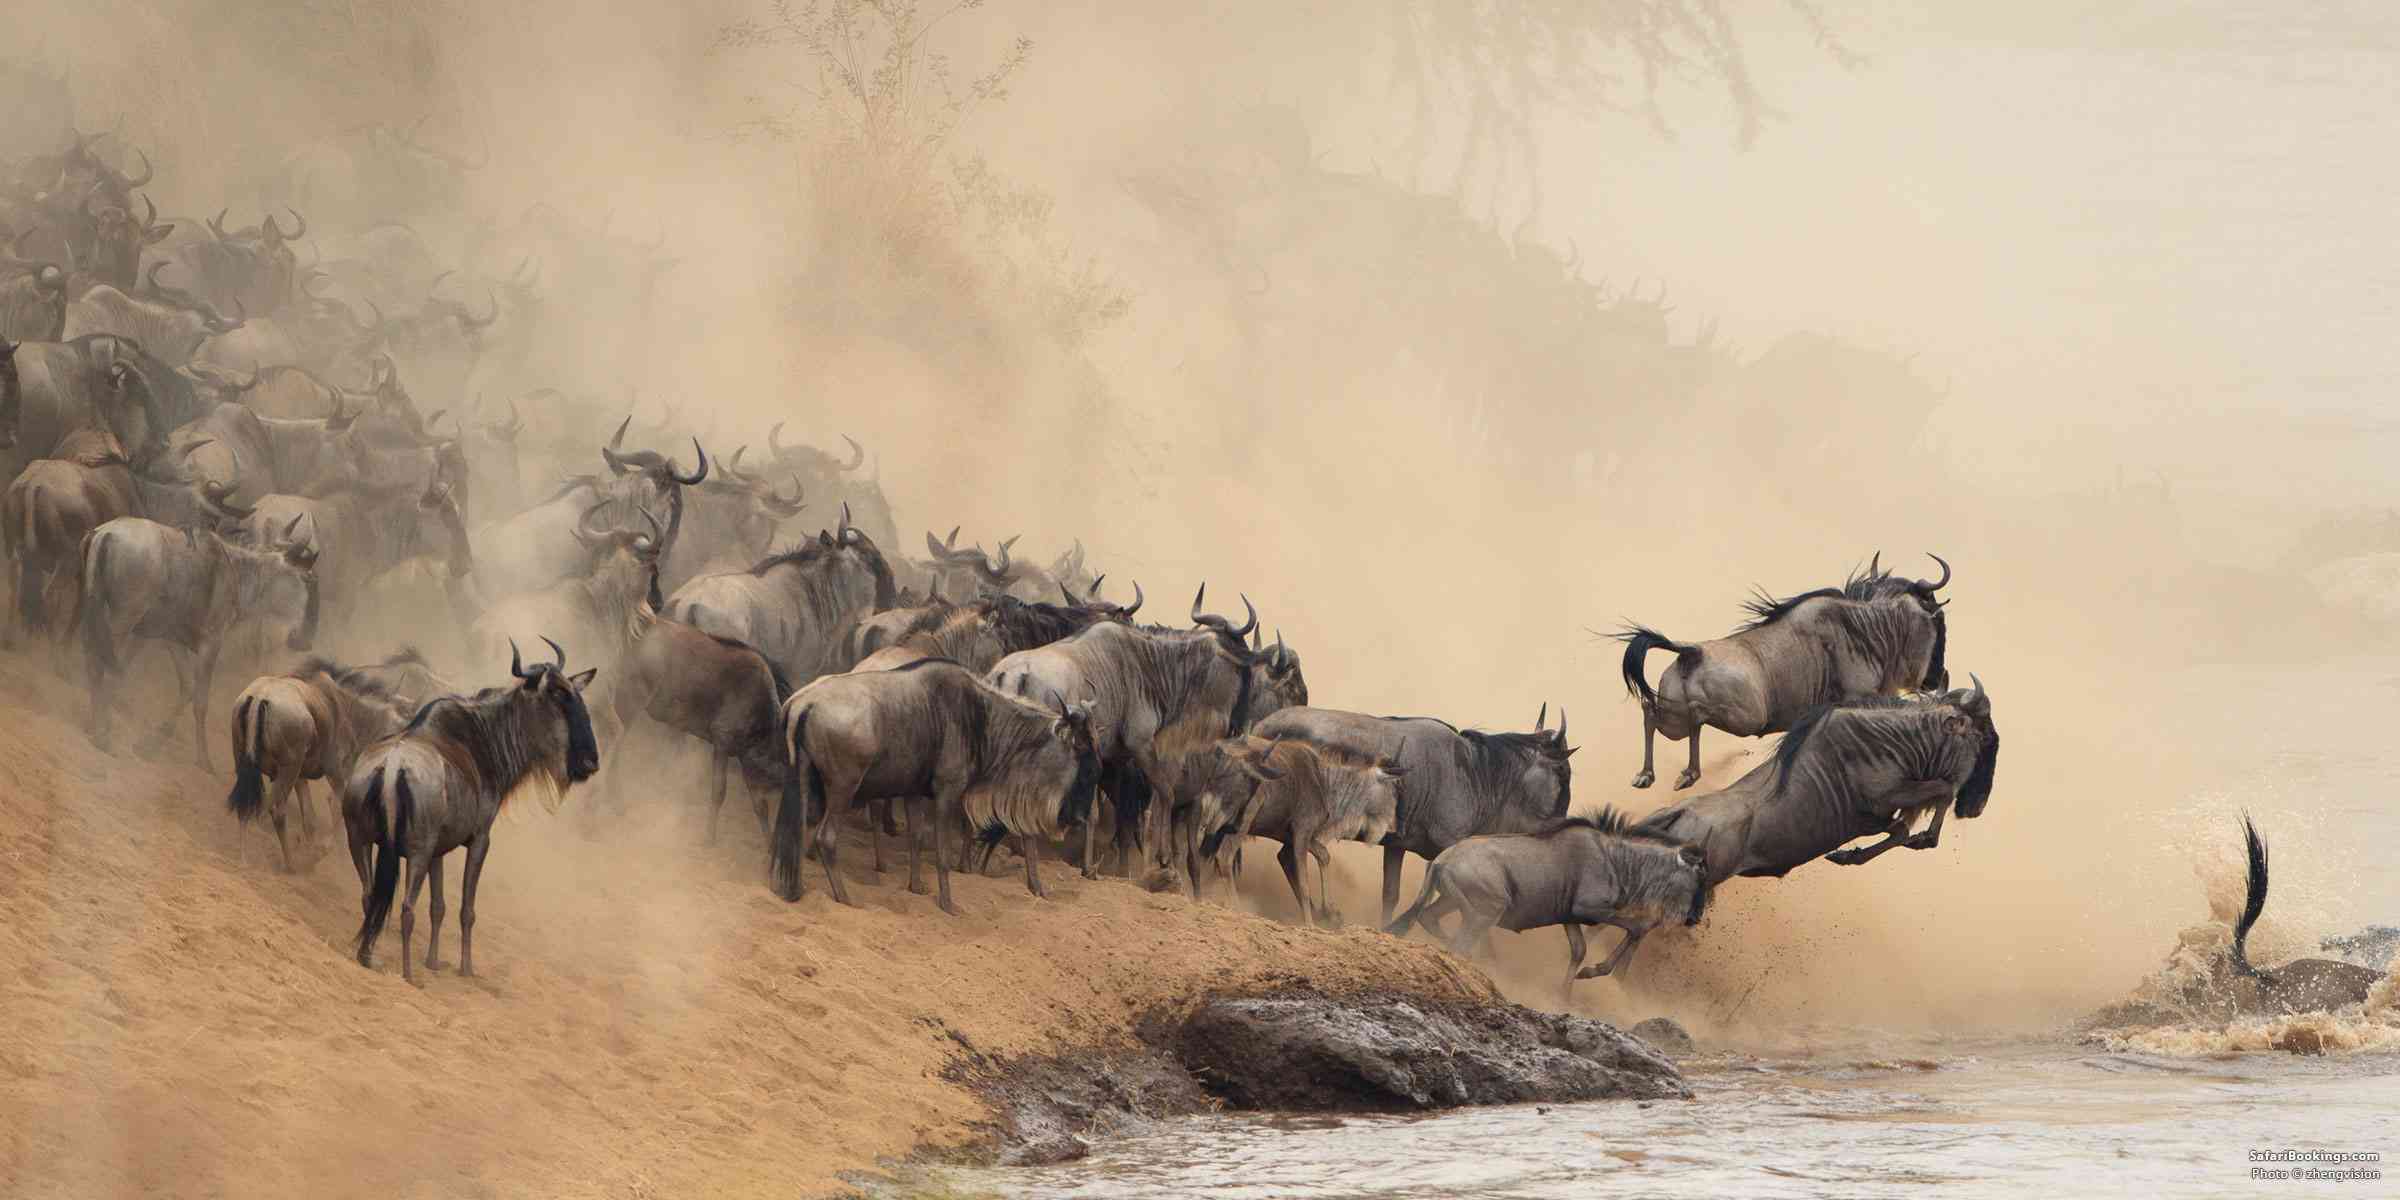 10 Reasons Why You Should Visit Kenya Right Now